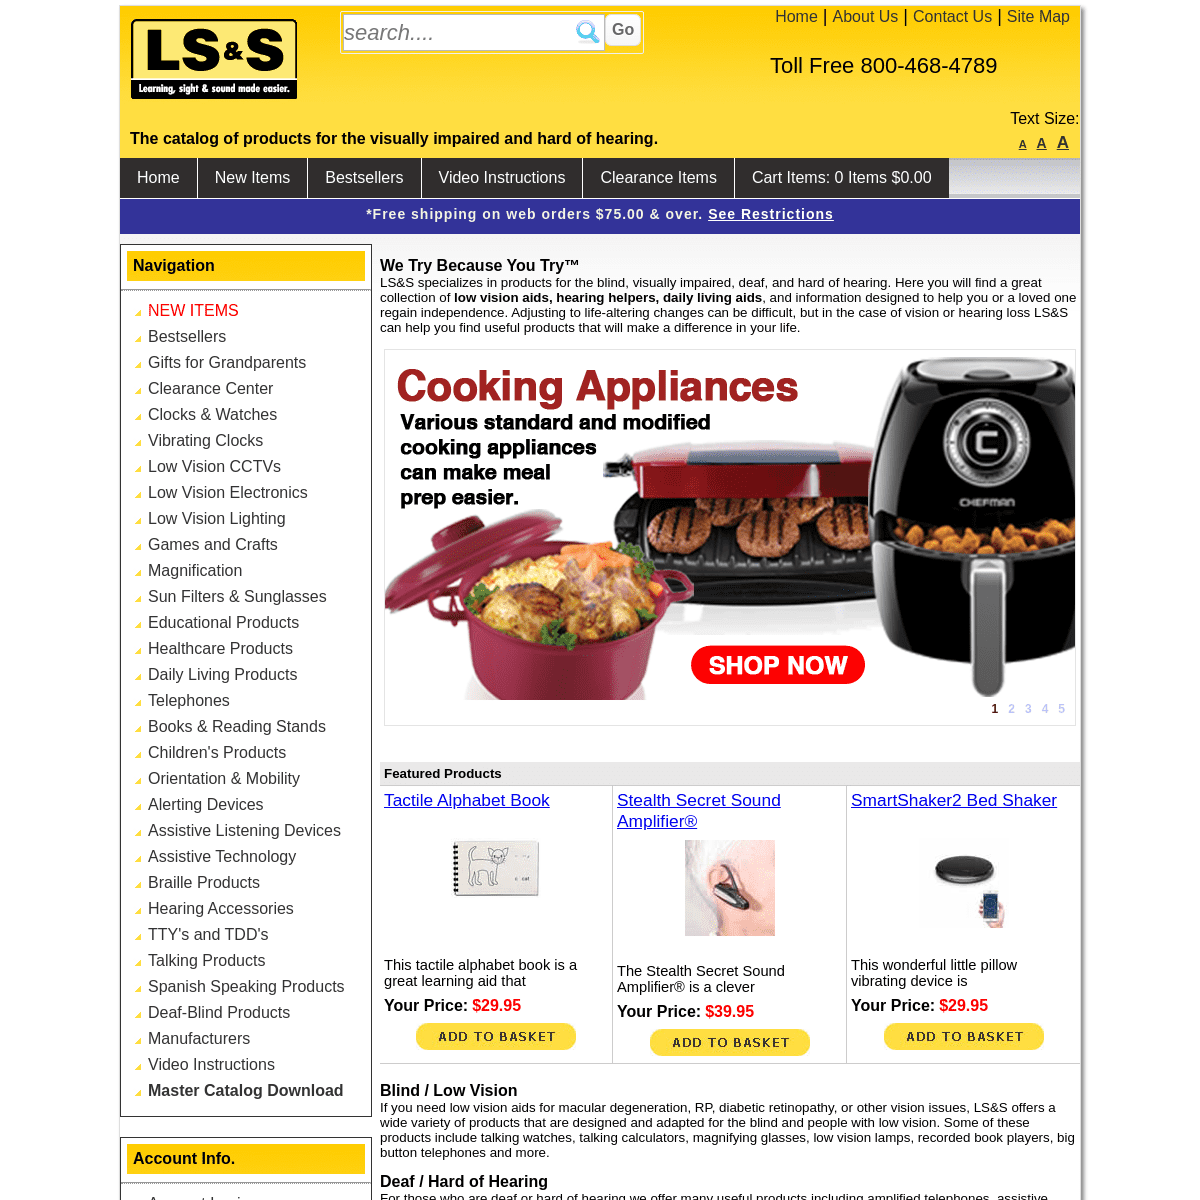 A complete backup of lssproducts.com